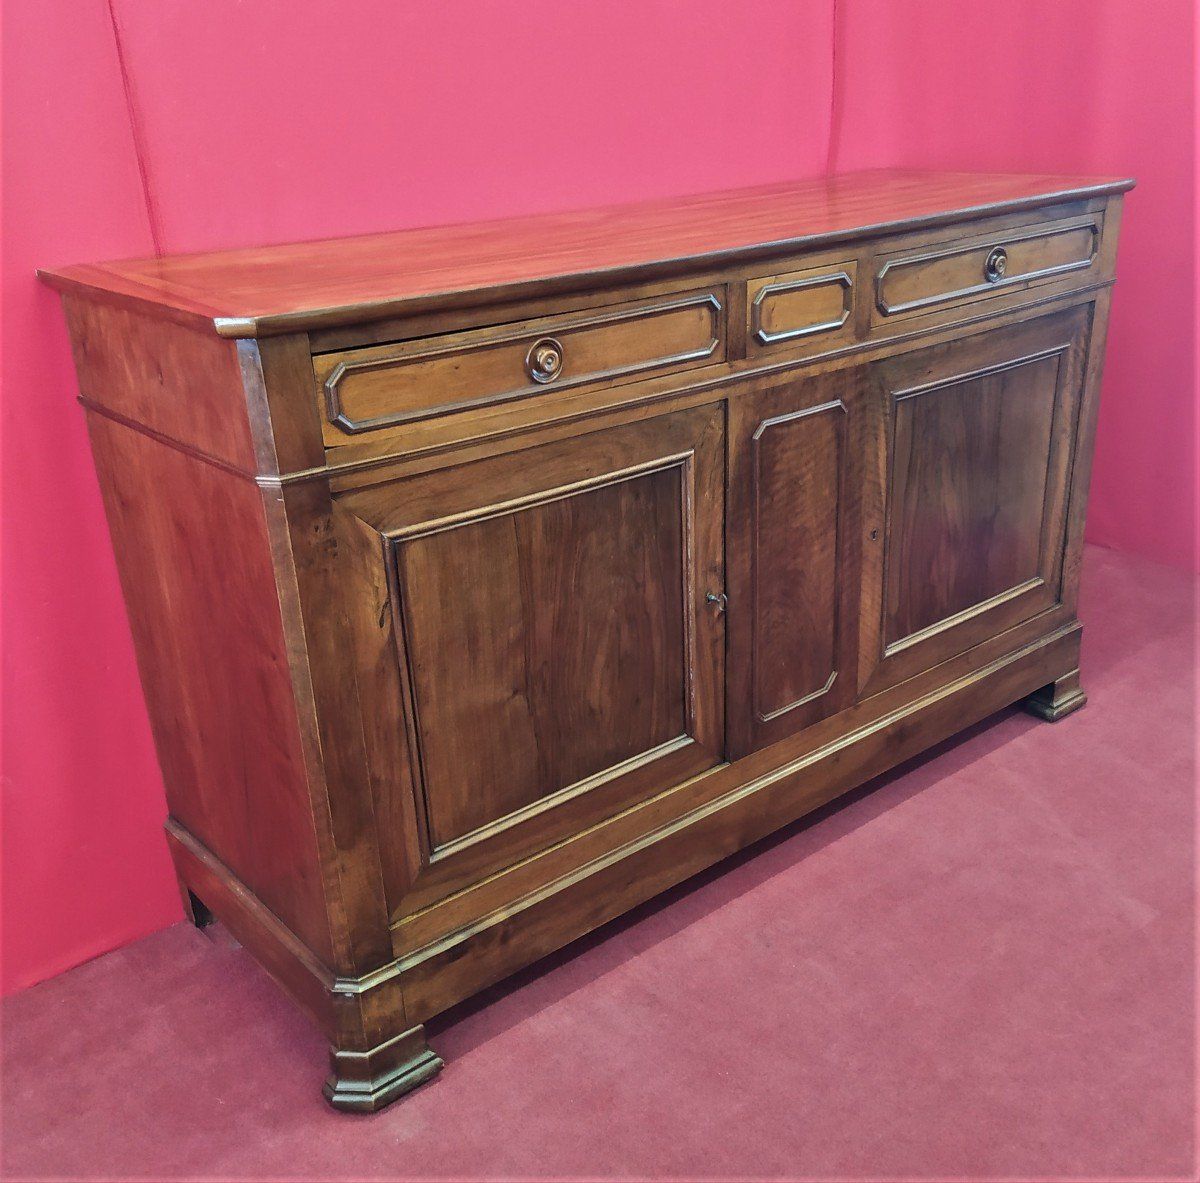 Proantic: Large Two Door Sideboard Pertaining To Most Recently Released Antique Storage Sideboards With Doors (View 2 of 15)